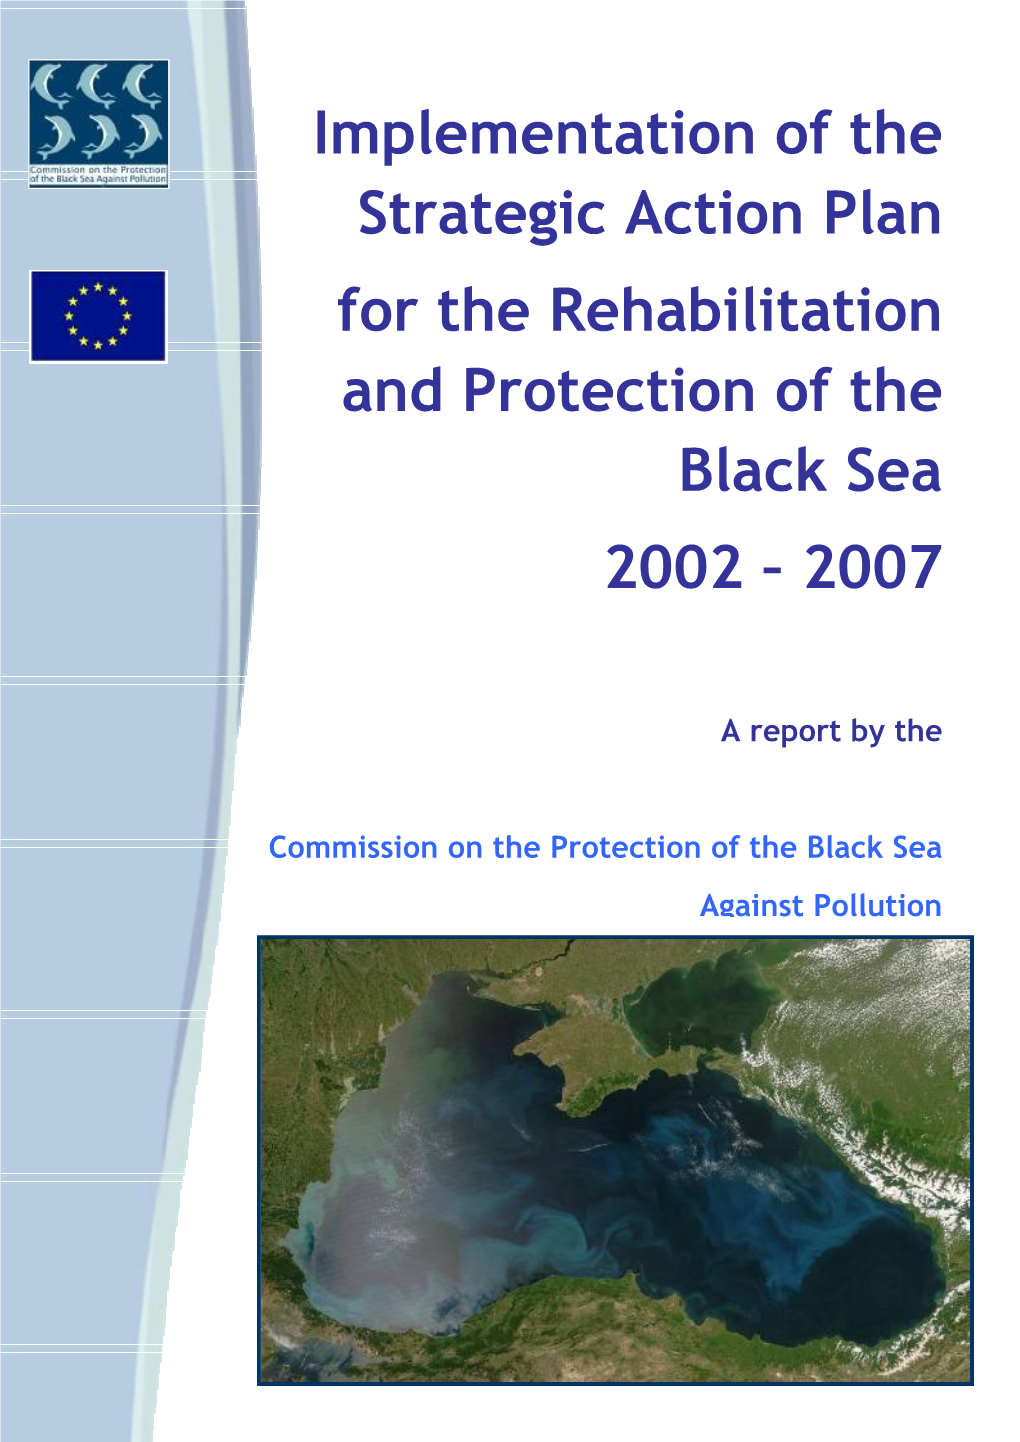 Implementation of the Strategic Action Plan for the Rehabilitation and Protection of the Black Sea 2002 – 2007